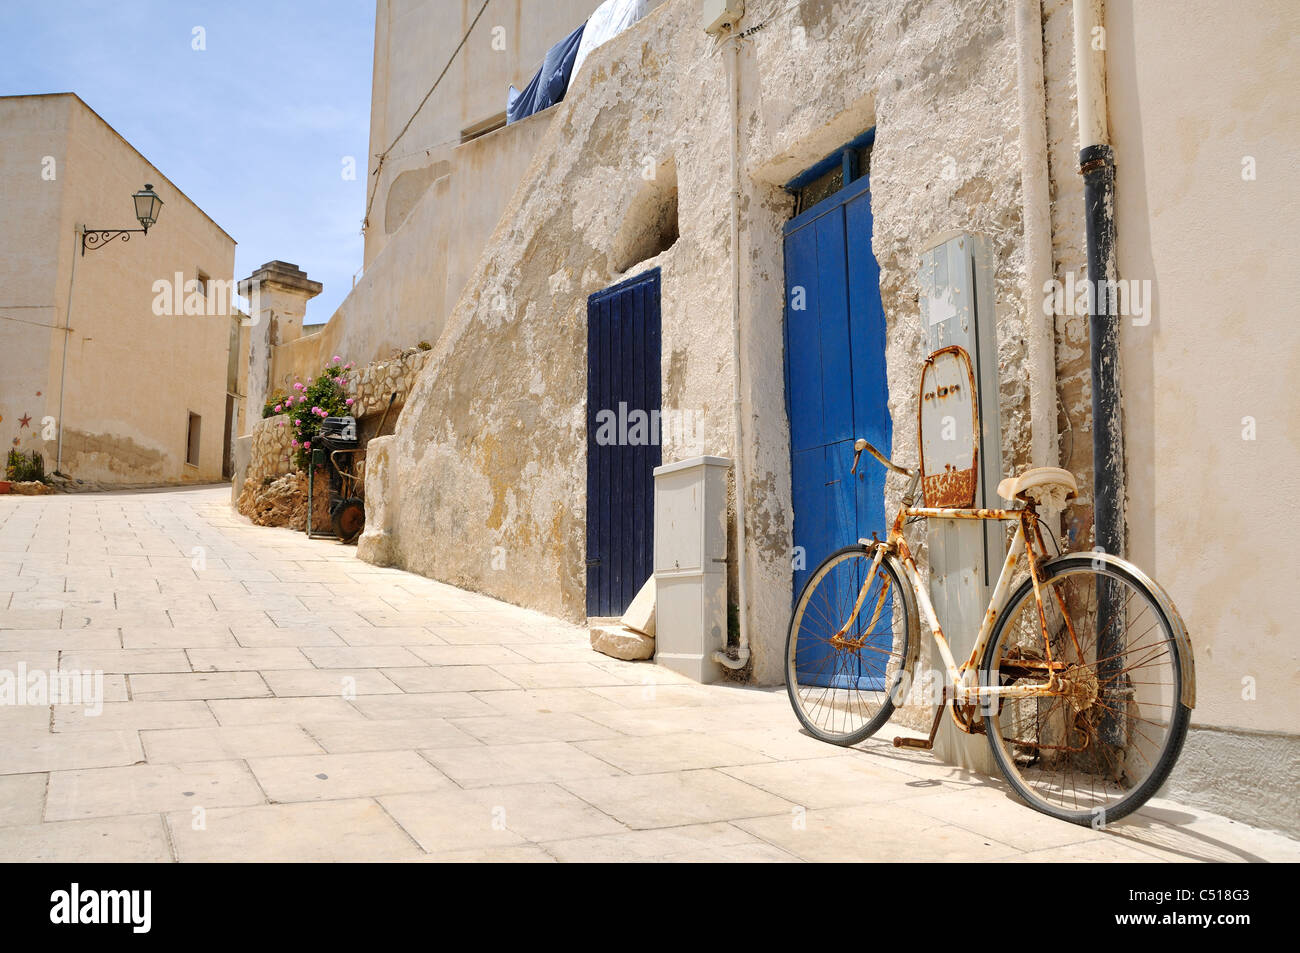 Bicycle in front of House, Levanzo, Aegadian Islands, Sicily, Italy Stock Photo